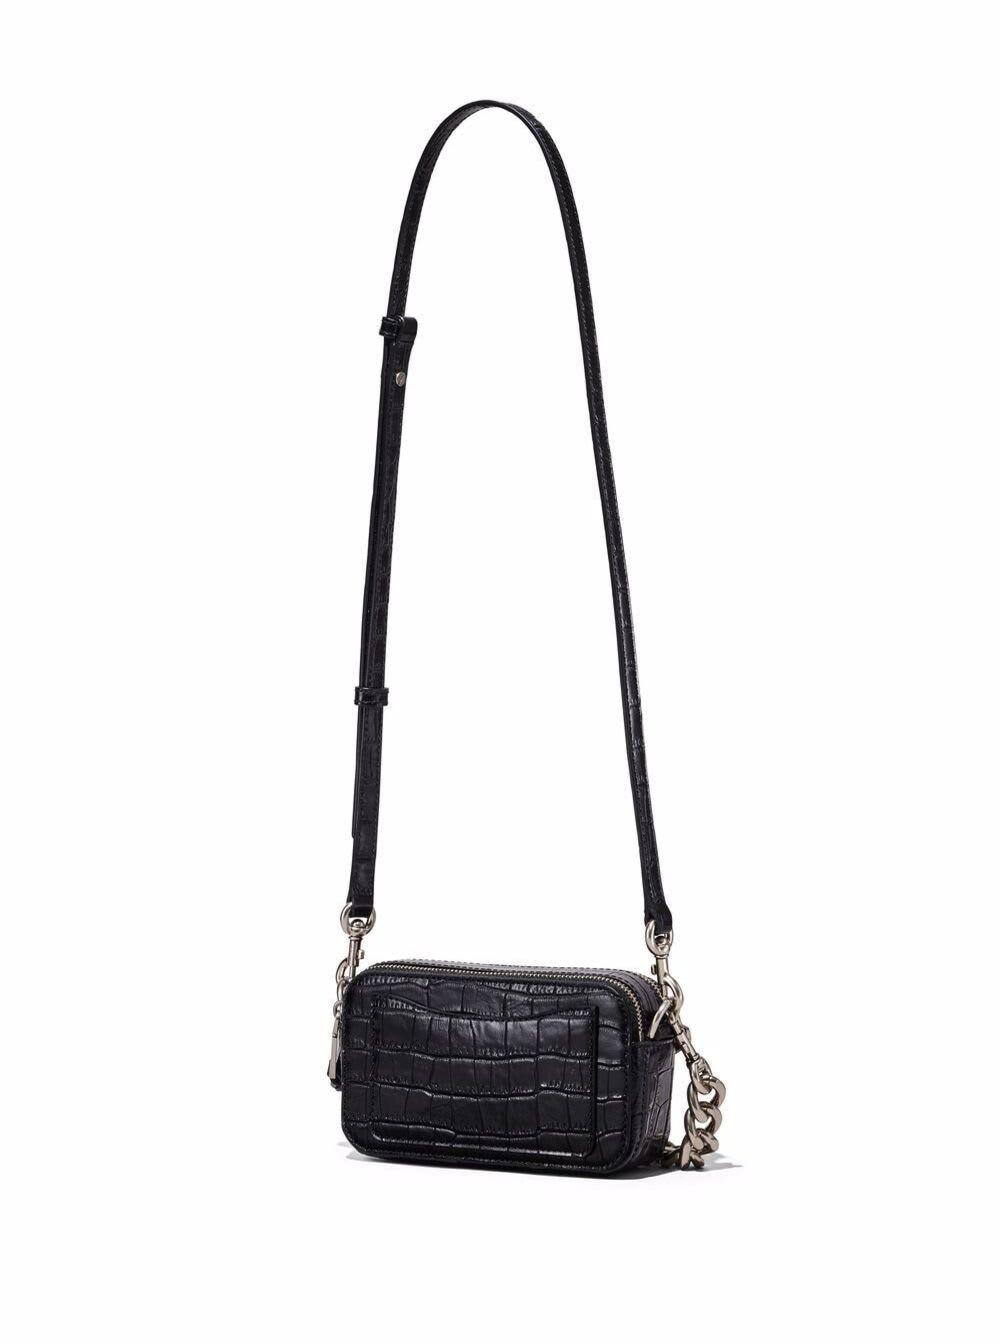 Snapshot leather crossbody bag Marc Jacobs Black in Leather - 18051491